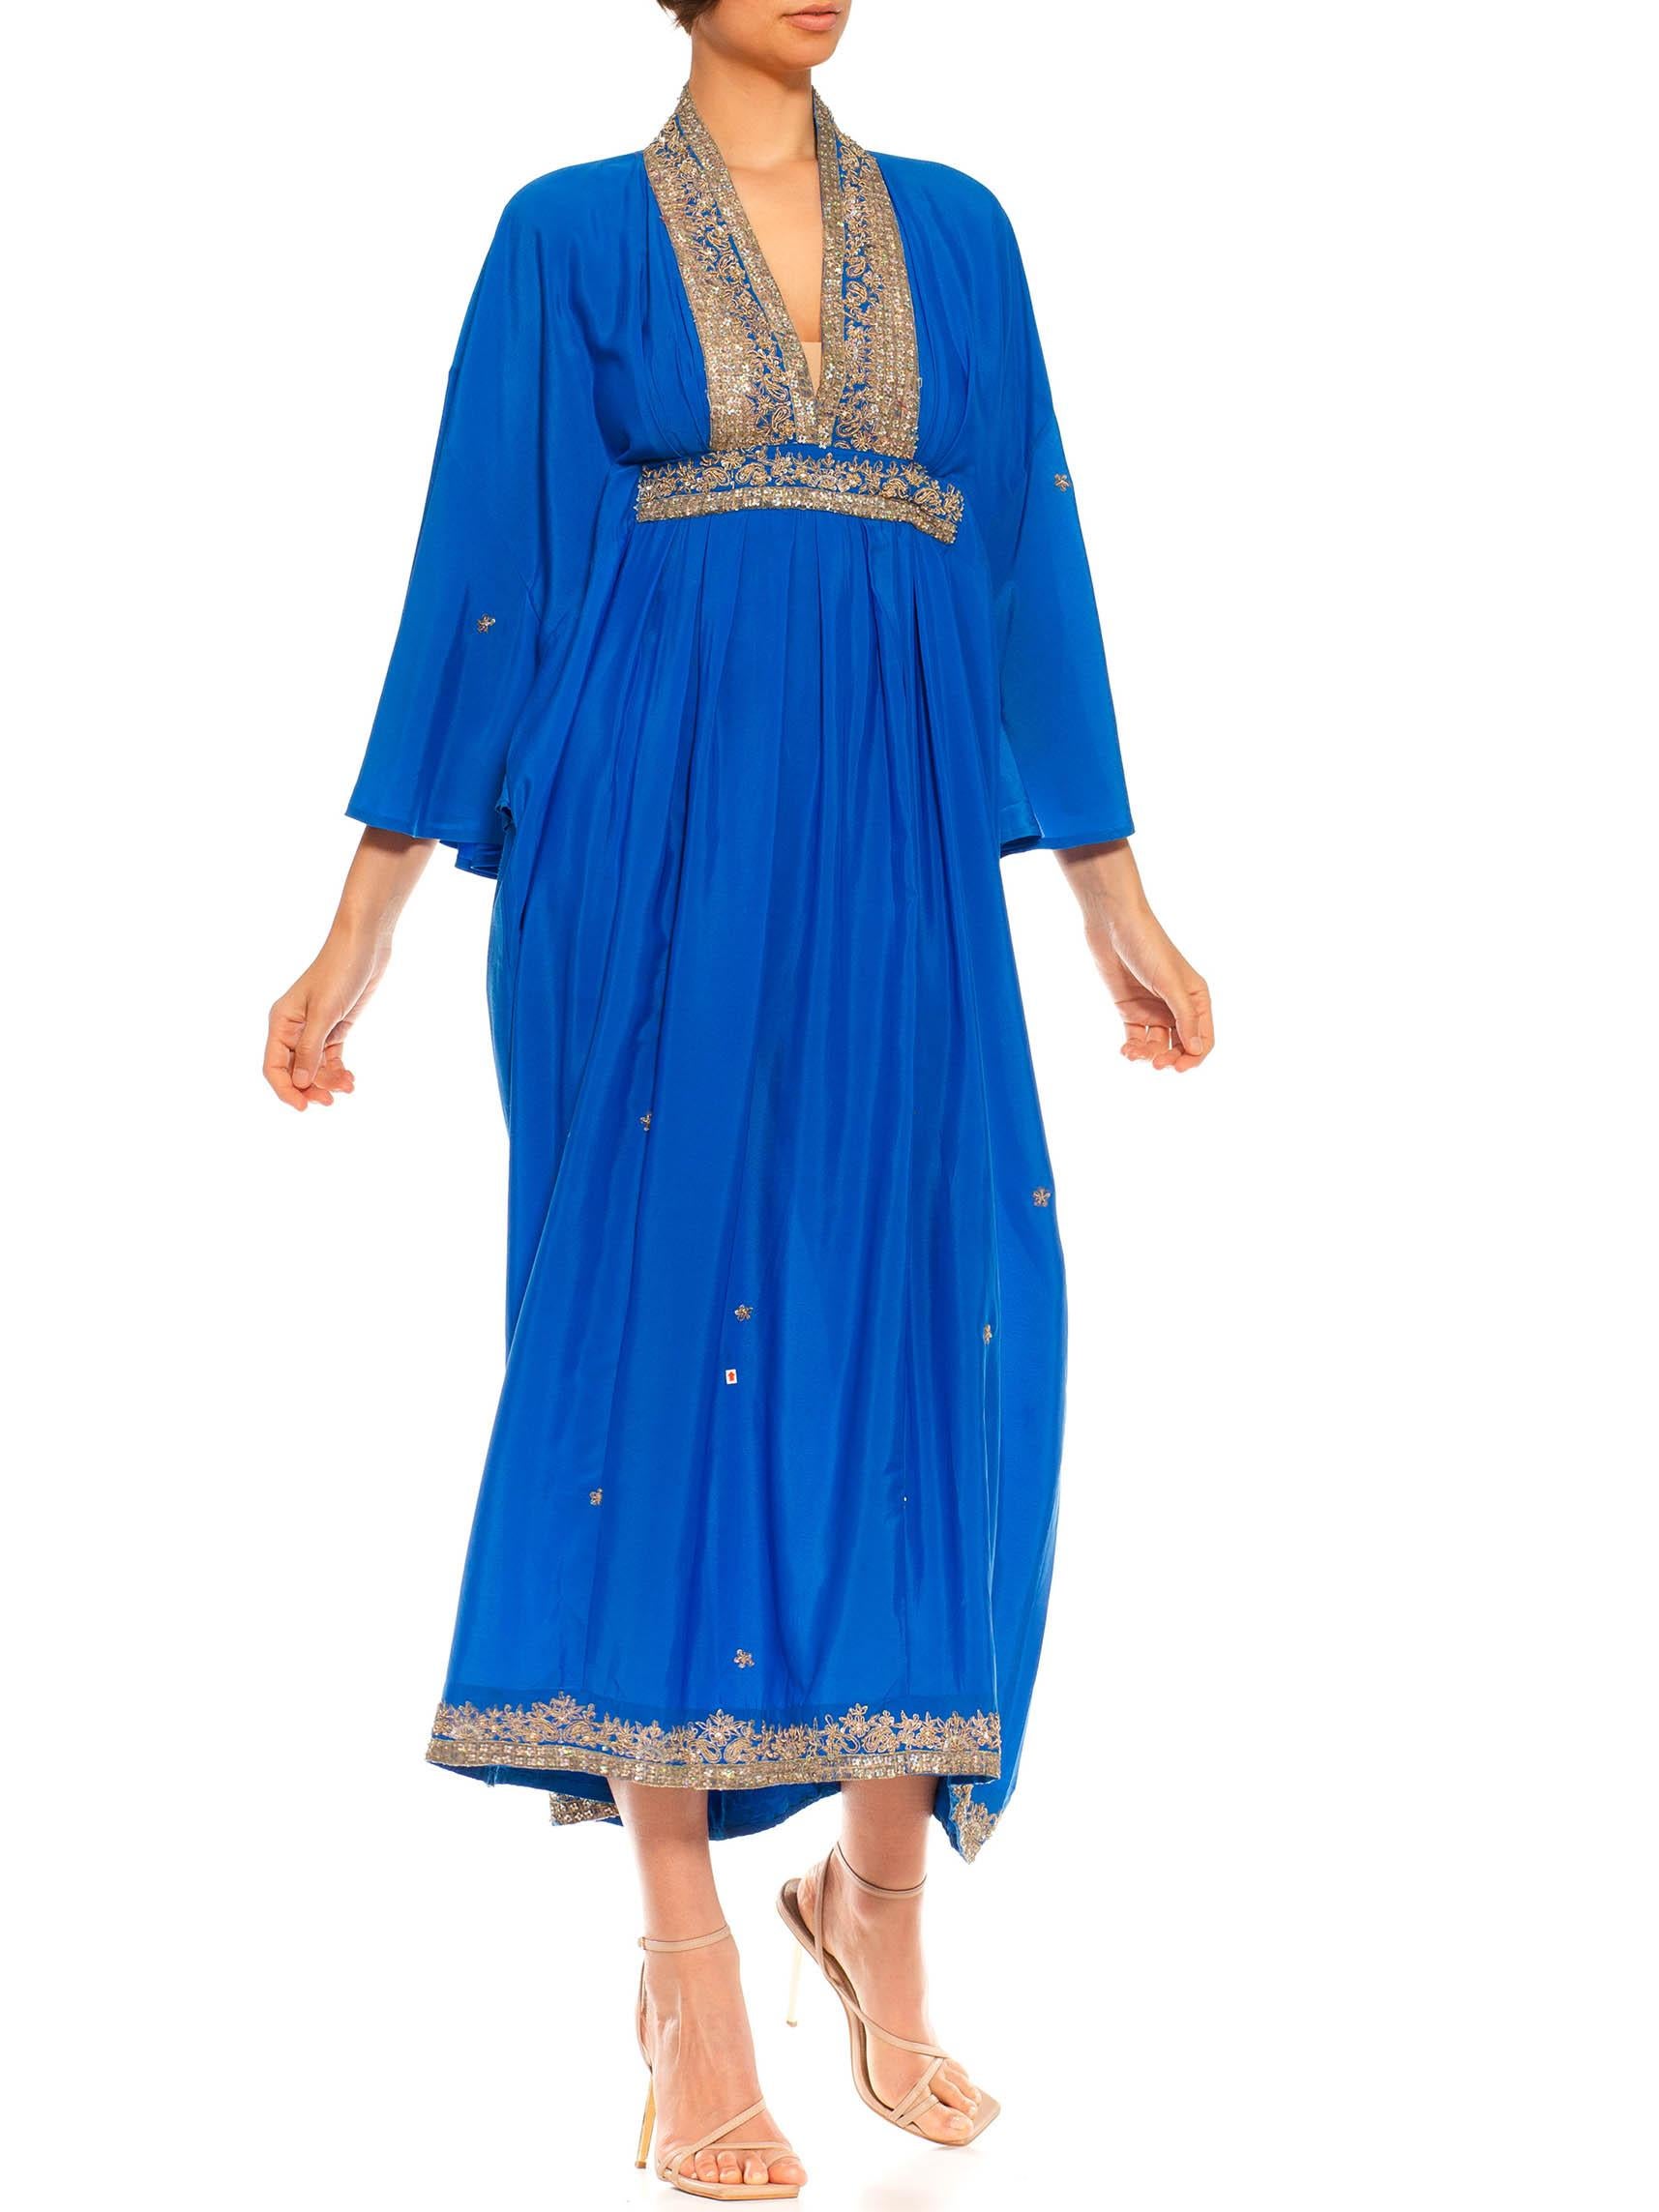 Morphew Collection Royal Blue Silk Kaftan With Sequined Silver Trimmings Made F In Excellent Condition For Sale In New York, NY